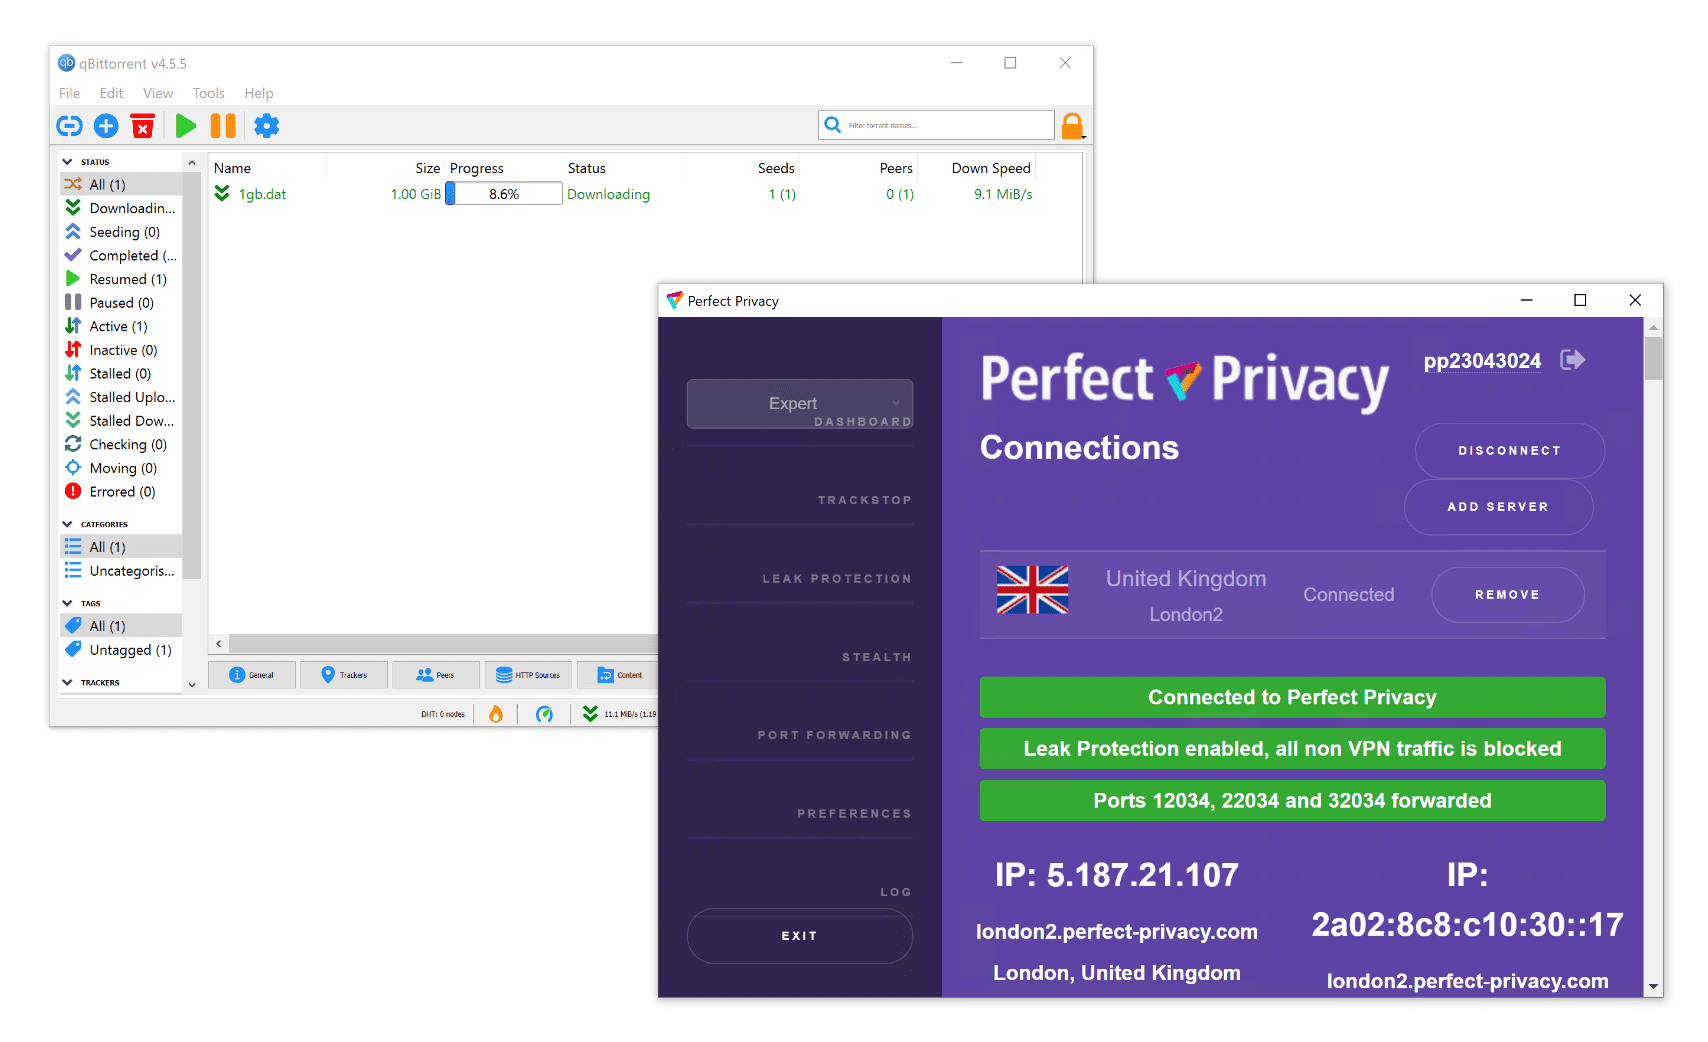 Testing Perfect Privacy's torrenting speeds